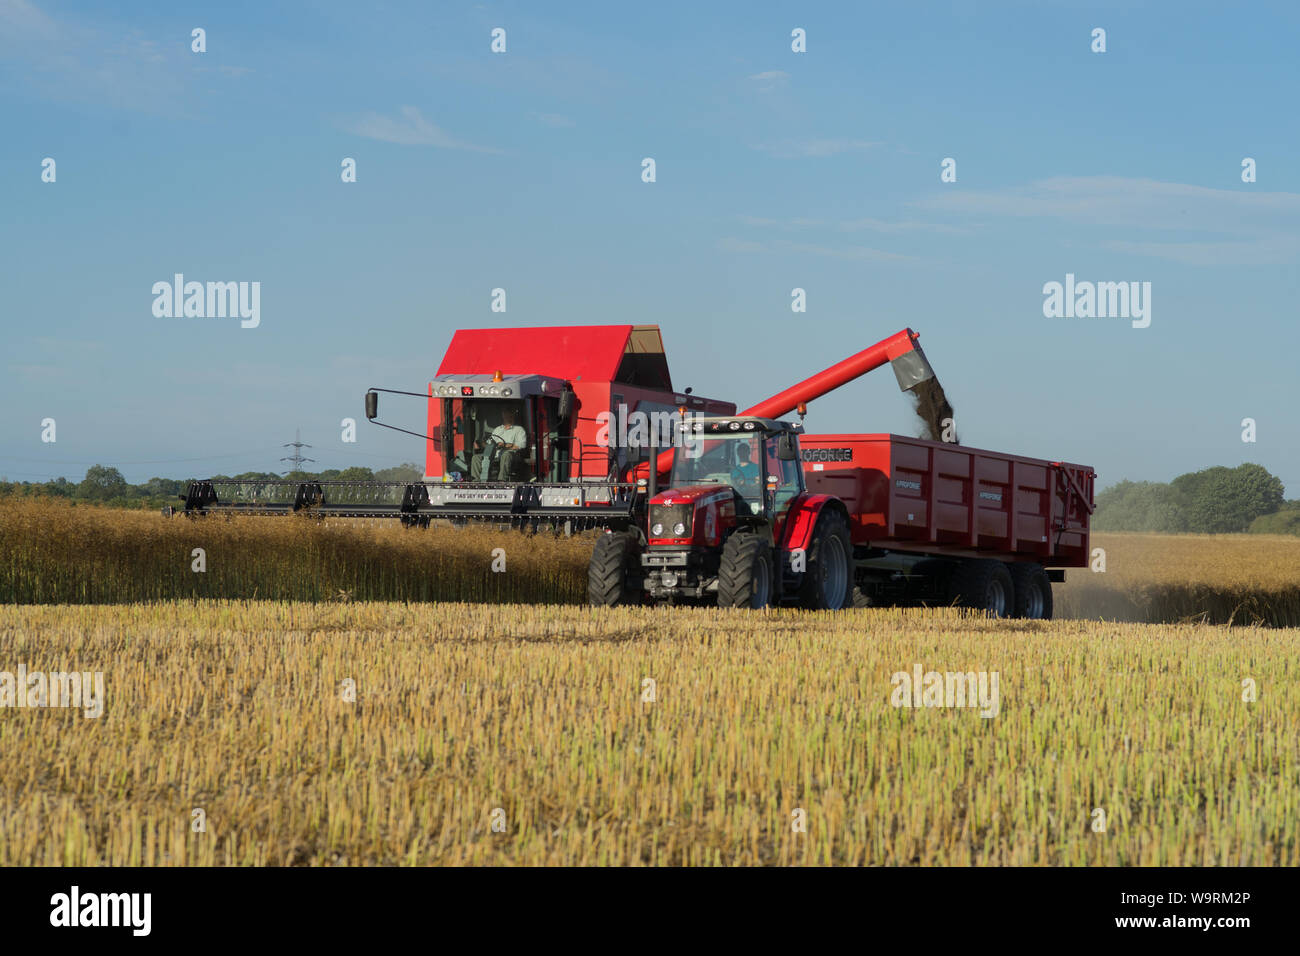 Combine harvester and Tractor harvesting oilseed rape field under blue skies Stock Photo